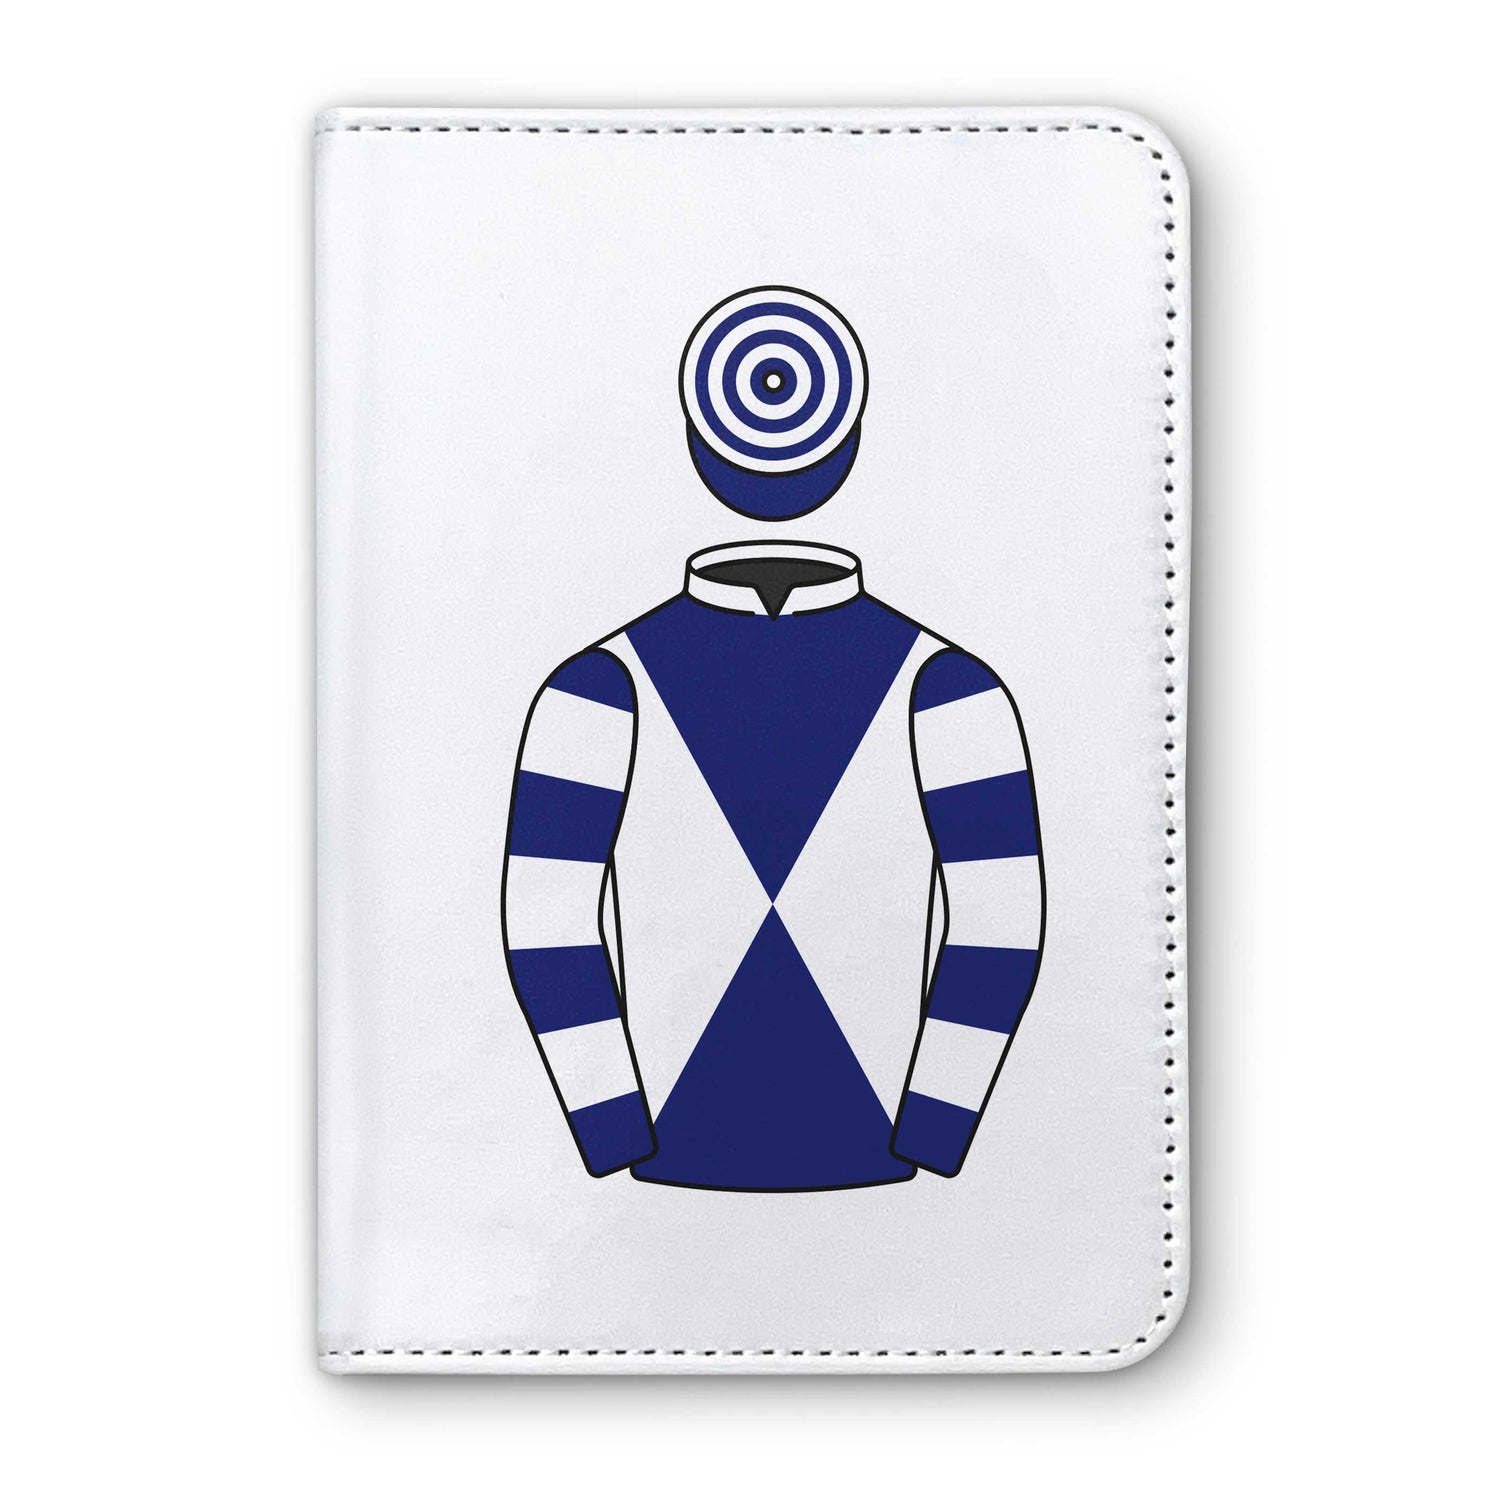 Walters Plant Hire Ltd Horse Racing Passport Holder - Hacked Up Horse Racing Gifts